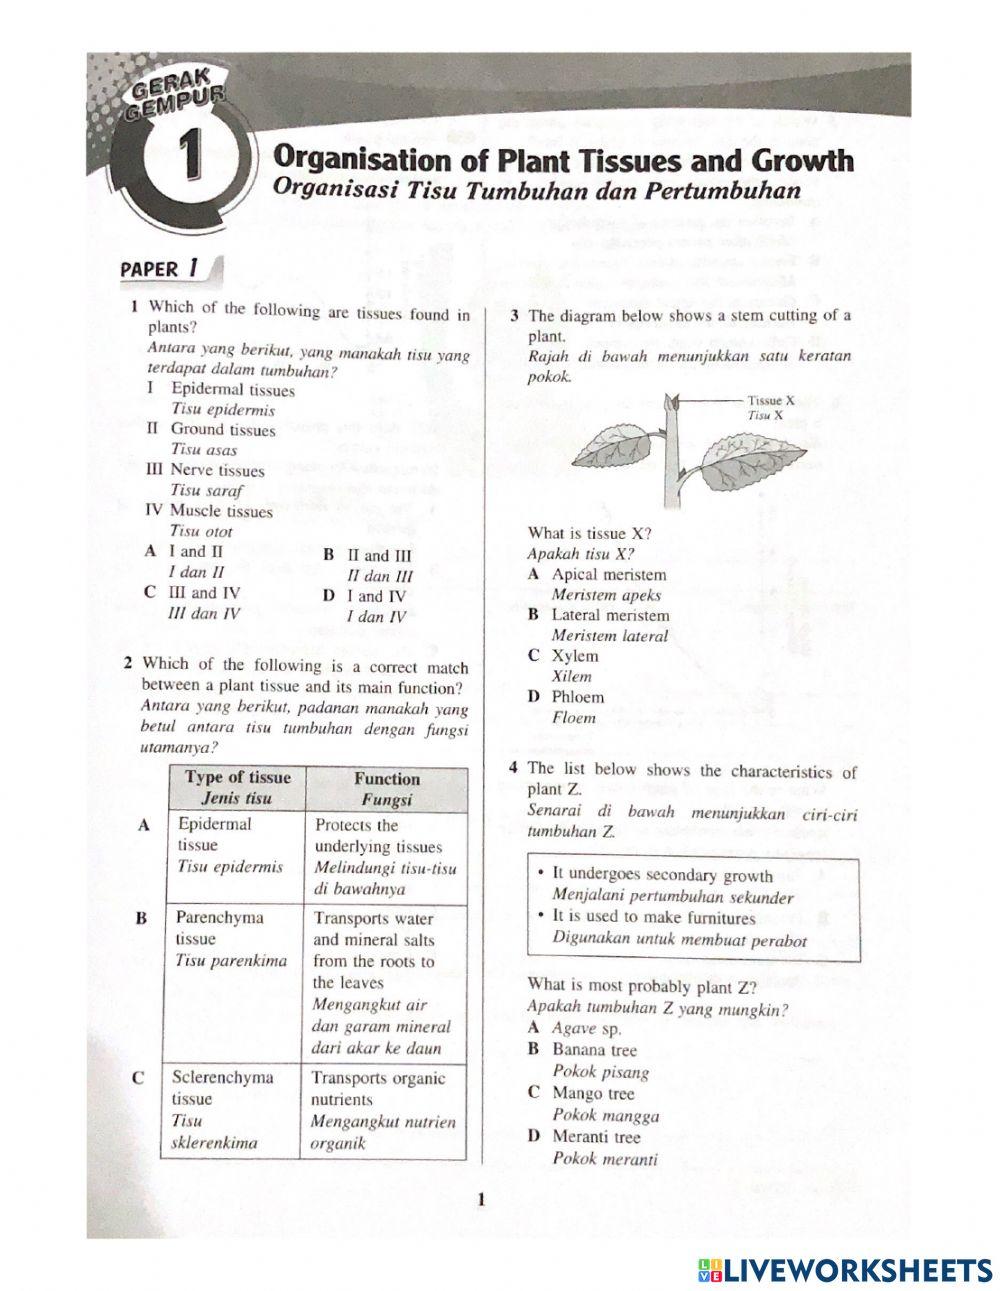 Chapter 1: Organisation of Planf Tissue and Growth